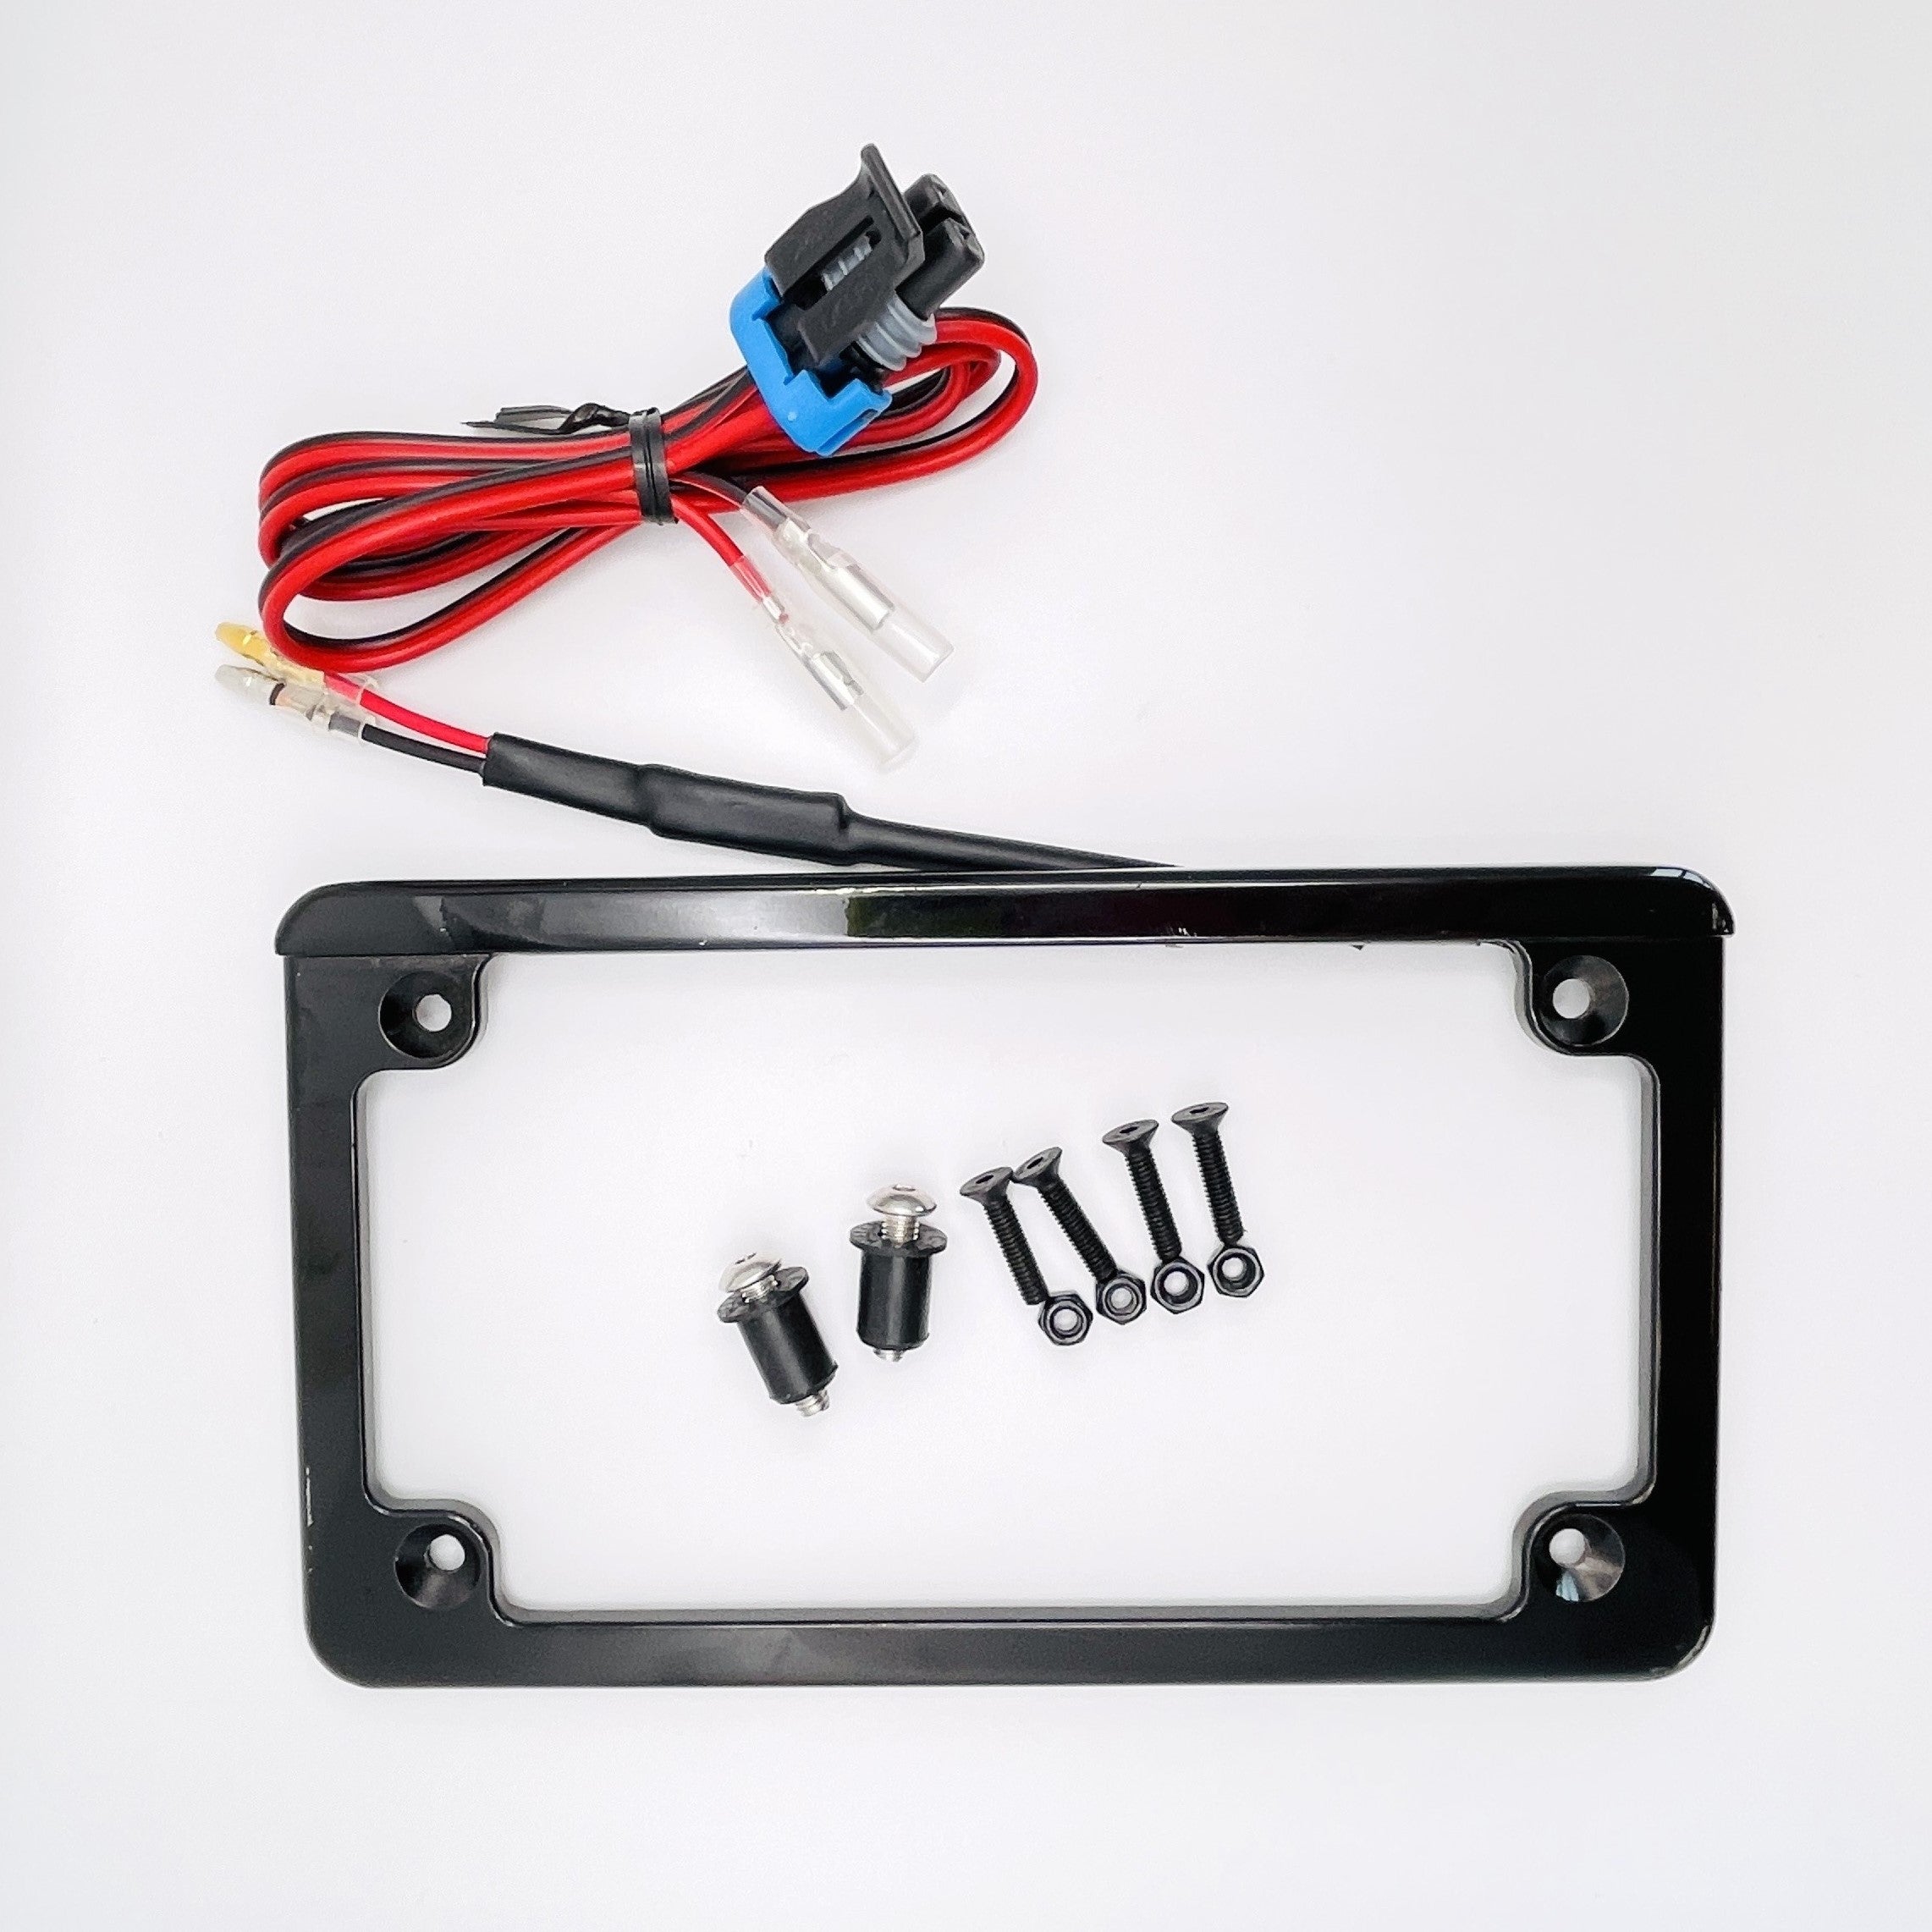 License Plate Frame Kit with Integrated LEDs - WD Electronics